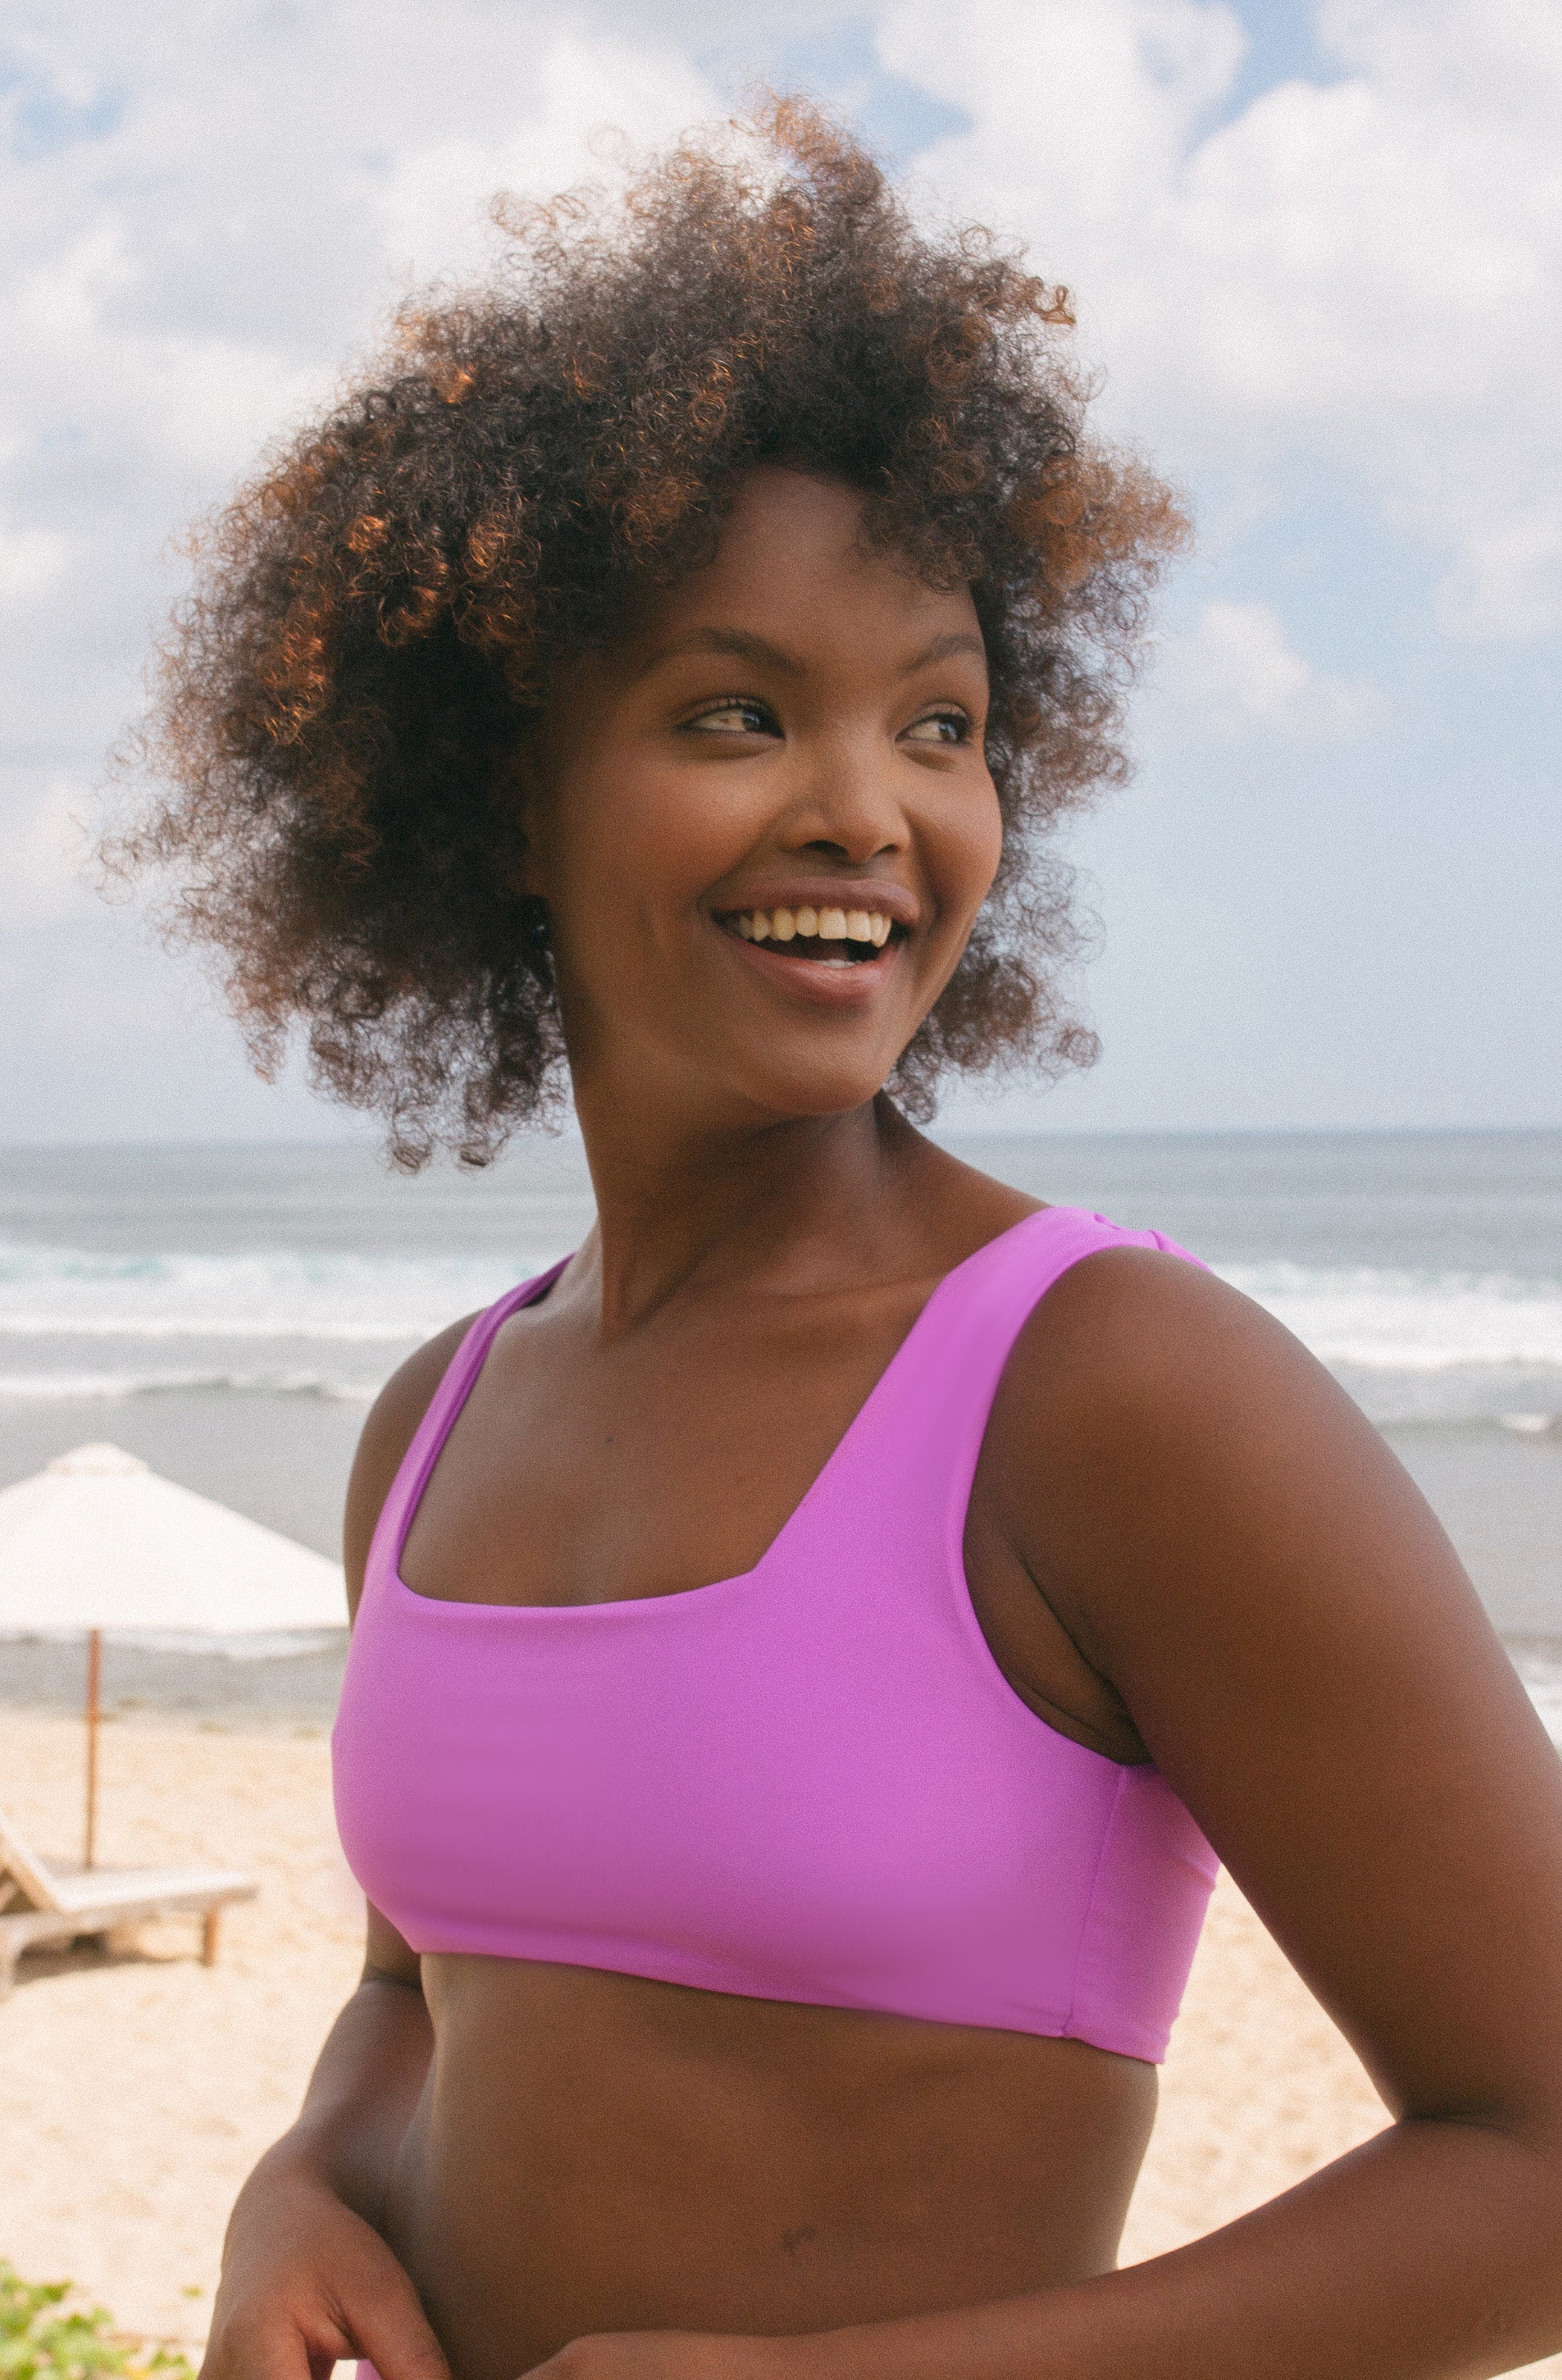 Aerie has a new swimwear line made from recycled plastic